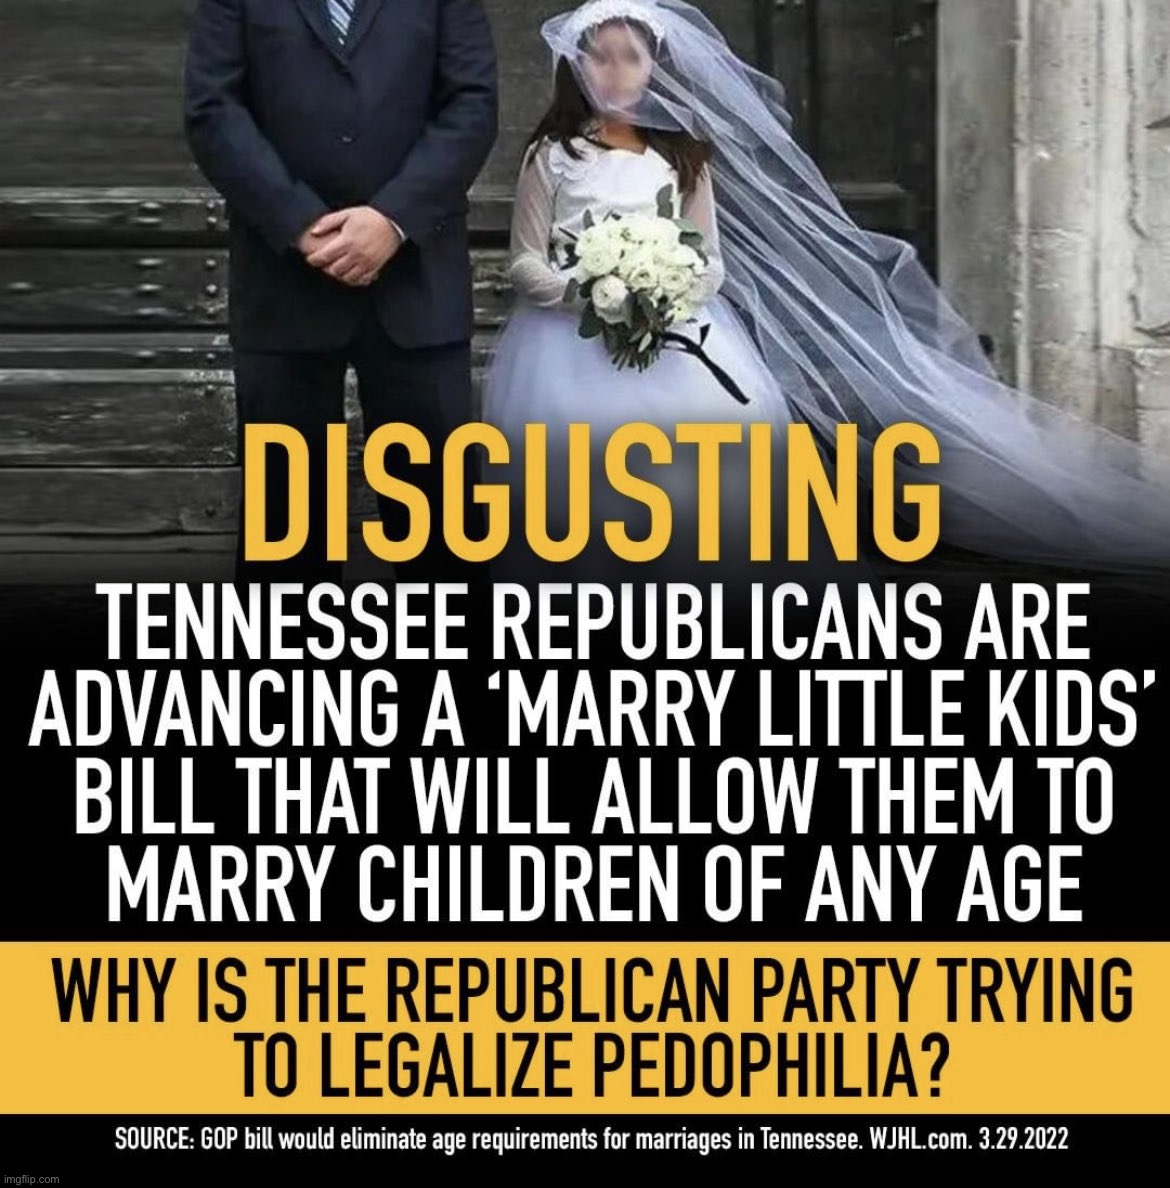 Tennessee pedophile bill | image tagged in tennessee pedophile bill,tennessee,pedophile,bill,pedo,pedophiles | made w/ Imgflip meme maker